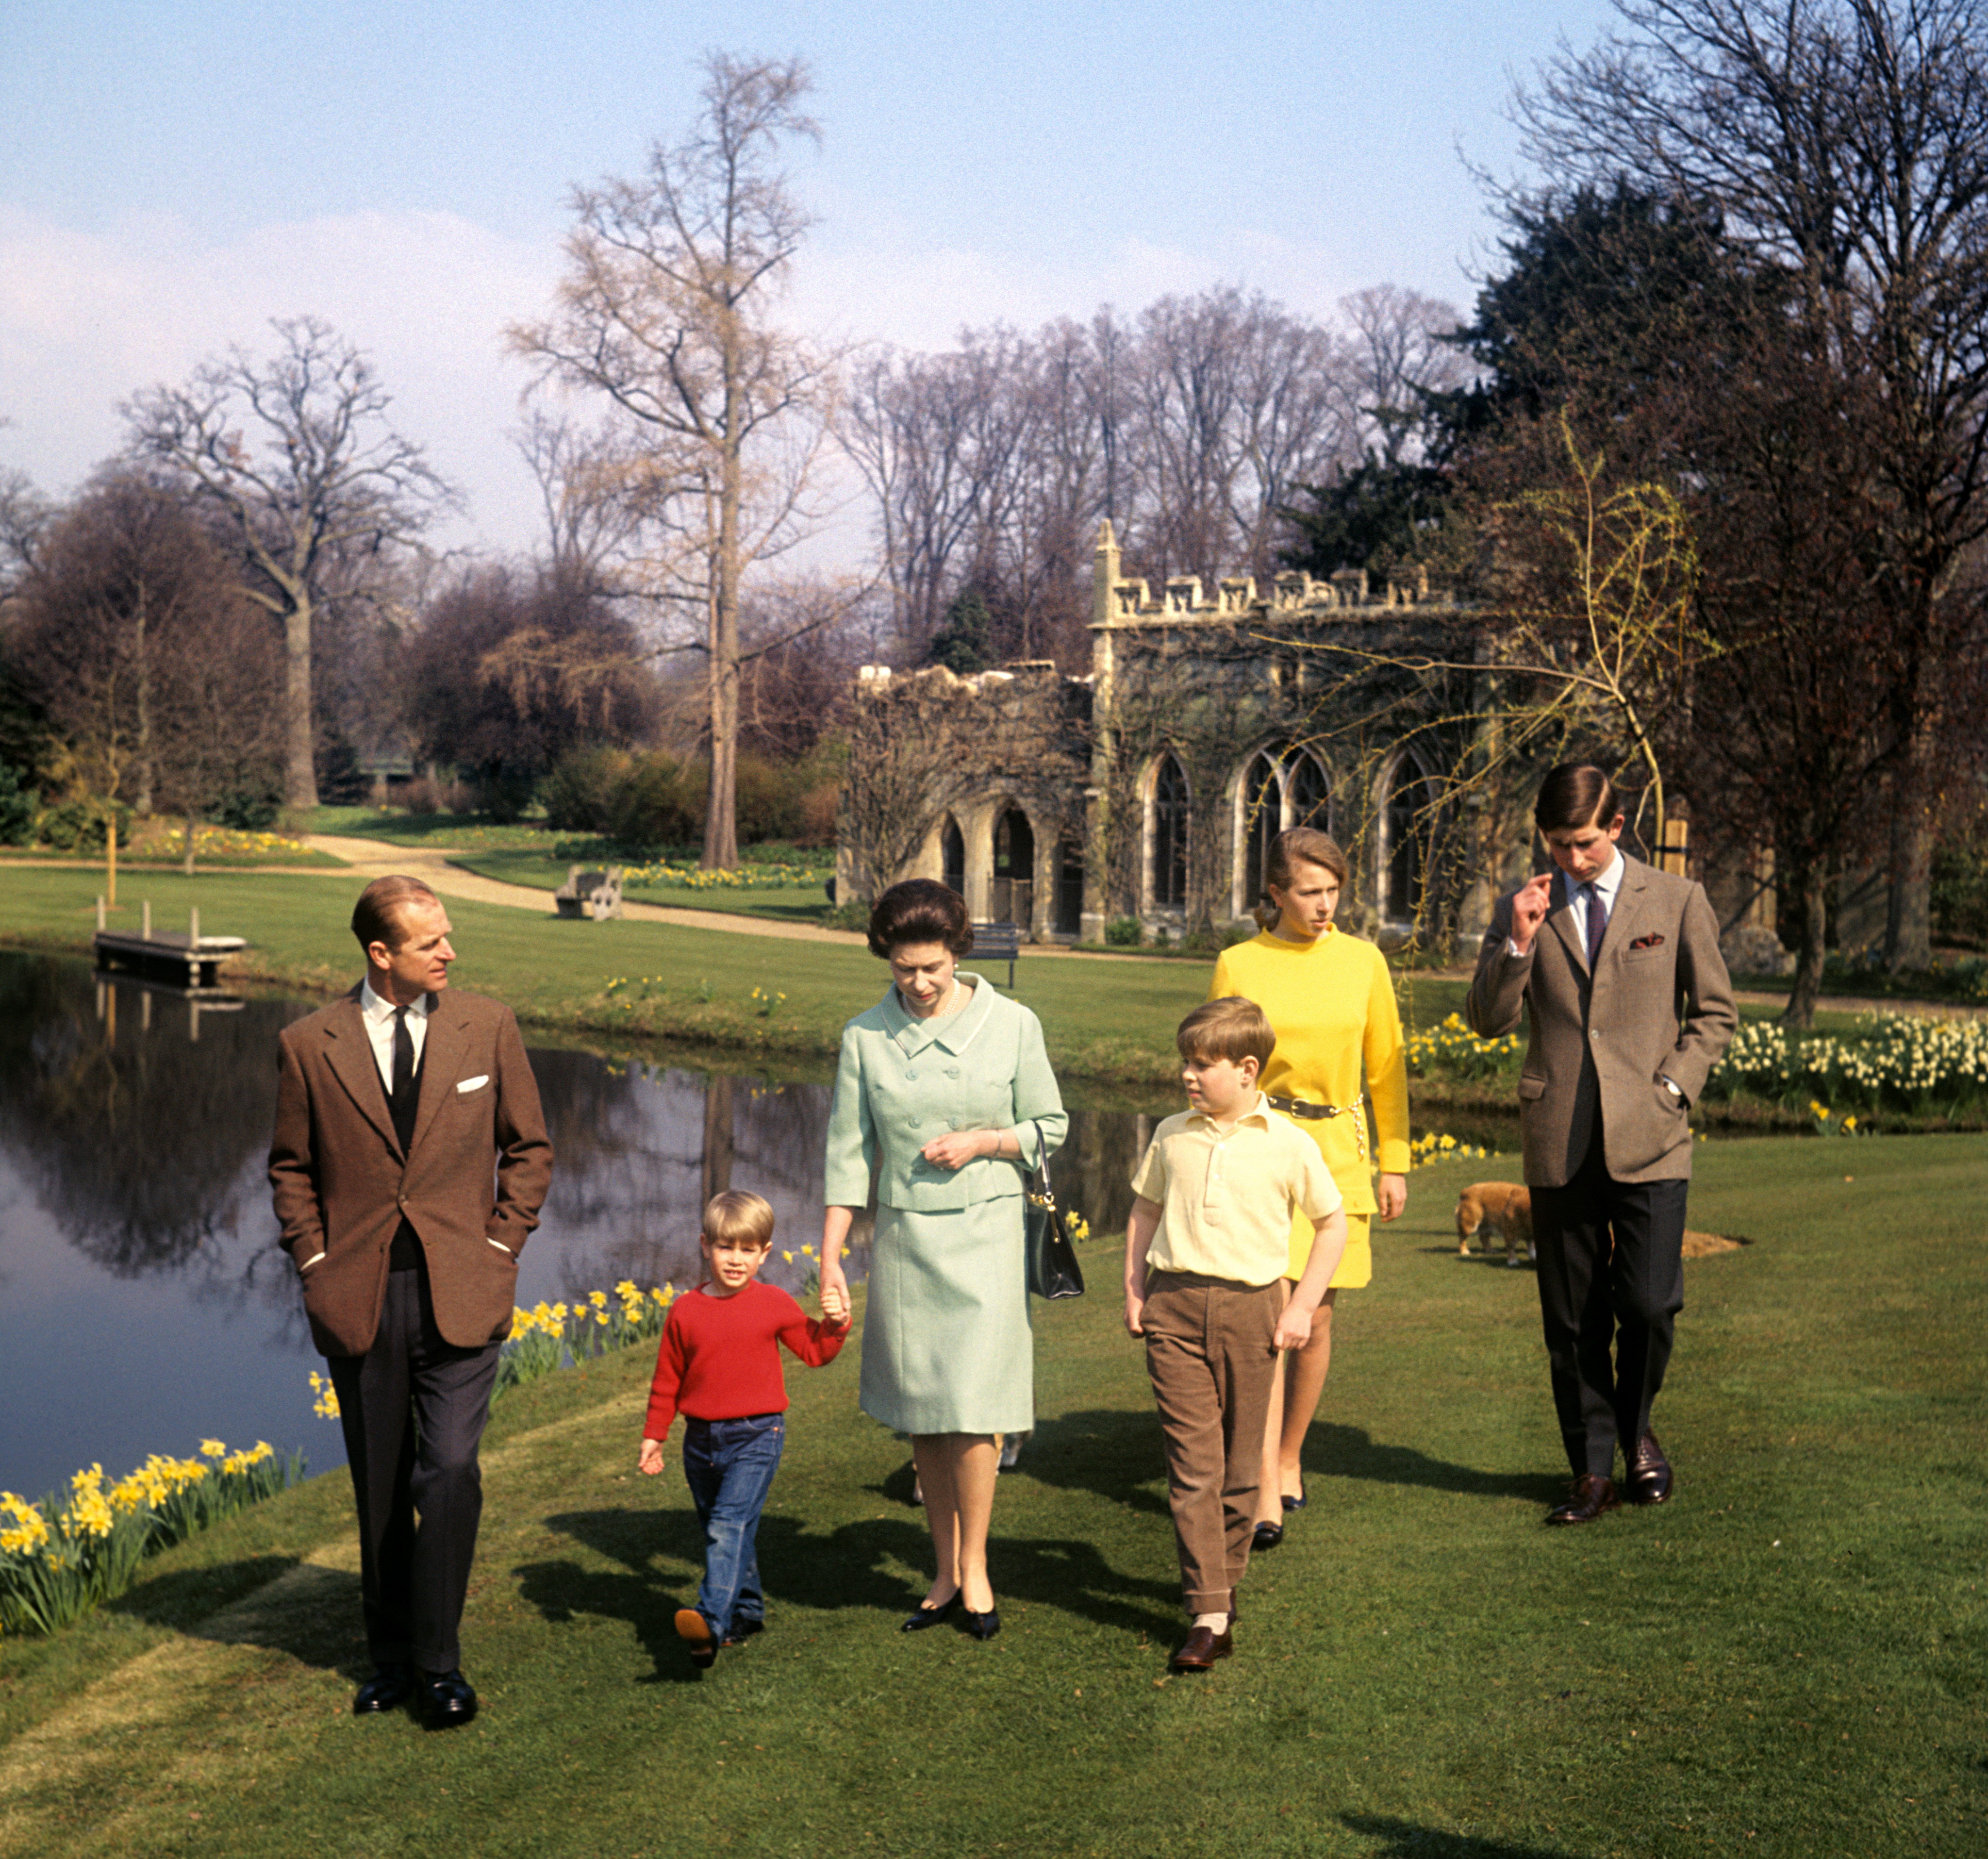 The Duke of Edinburgh, Prince Edward, the Queen, Prince Andrew, Princess Anne and Prince Charles in the grounds of Frogmore House, Windsor, in 1968